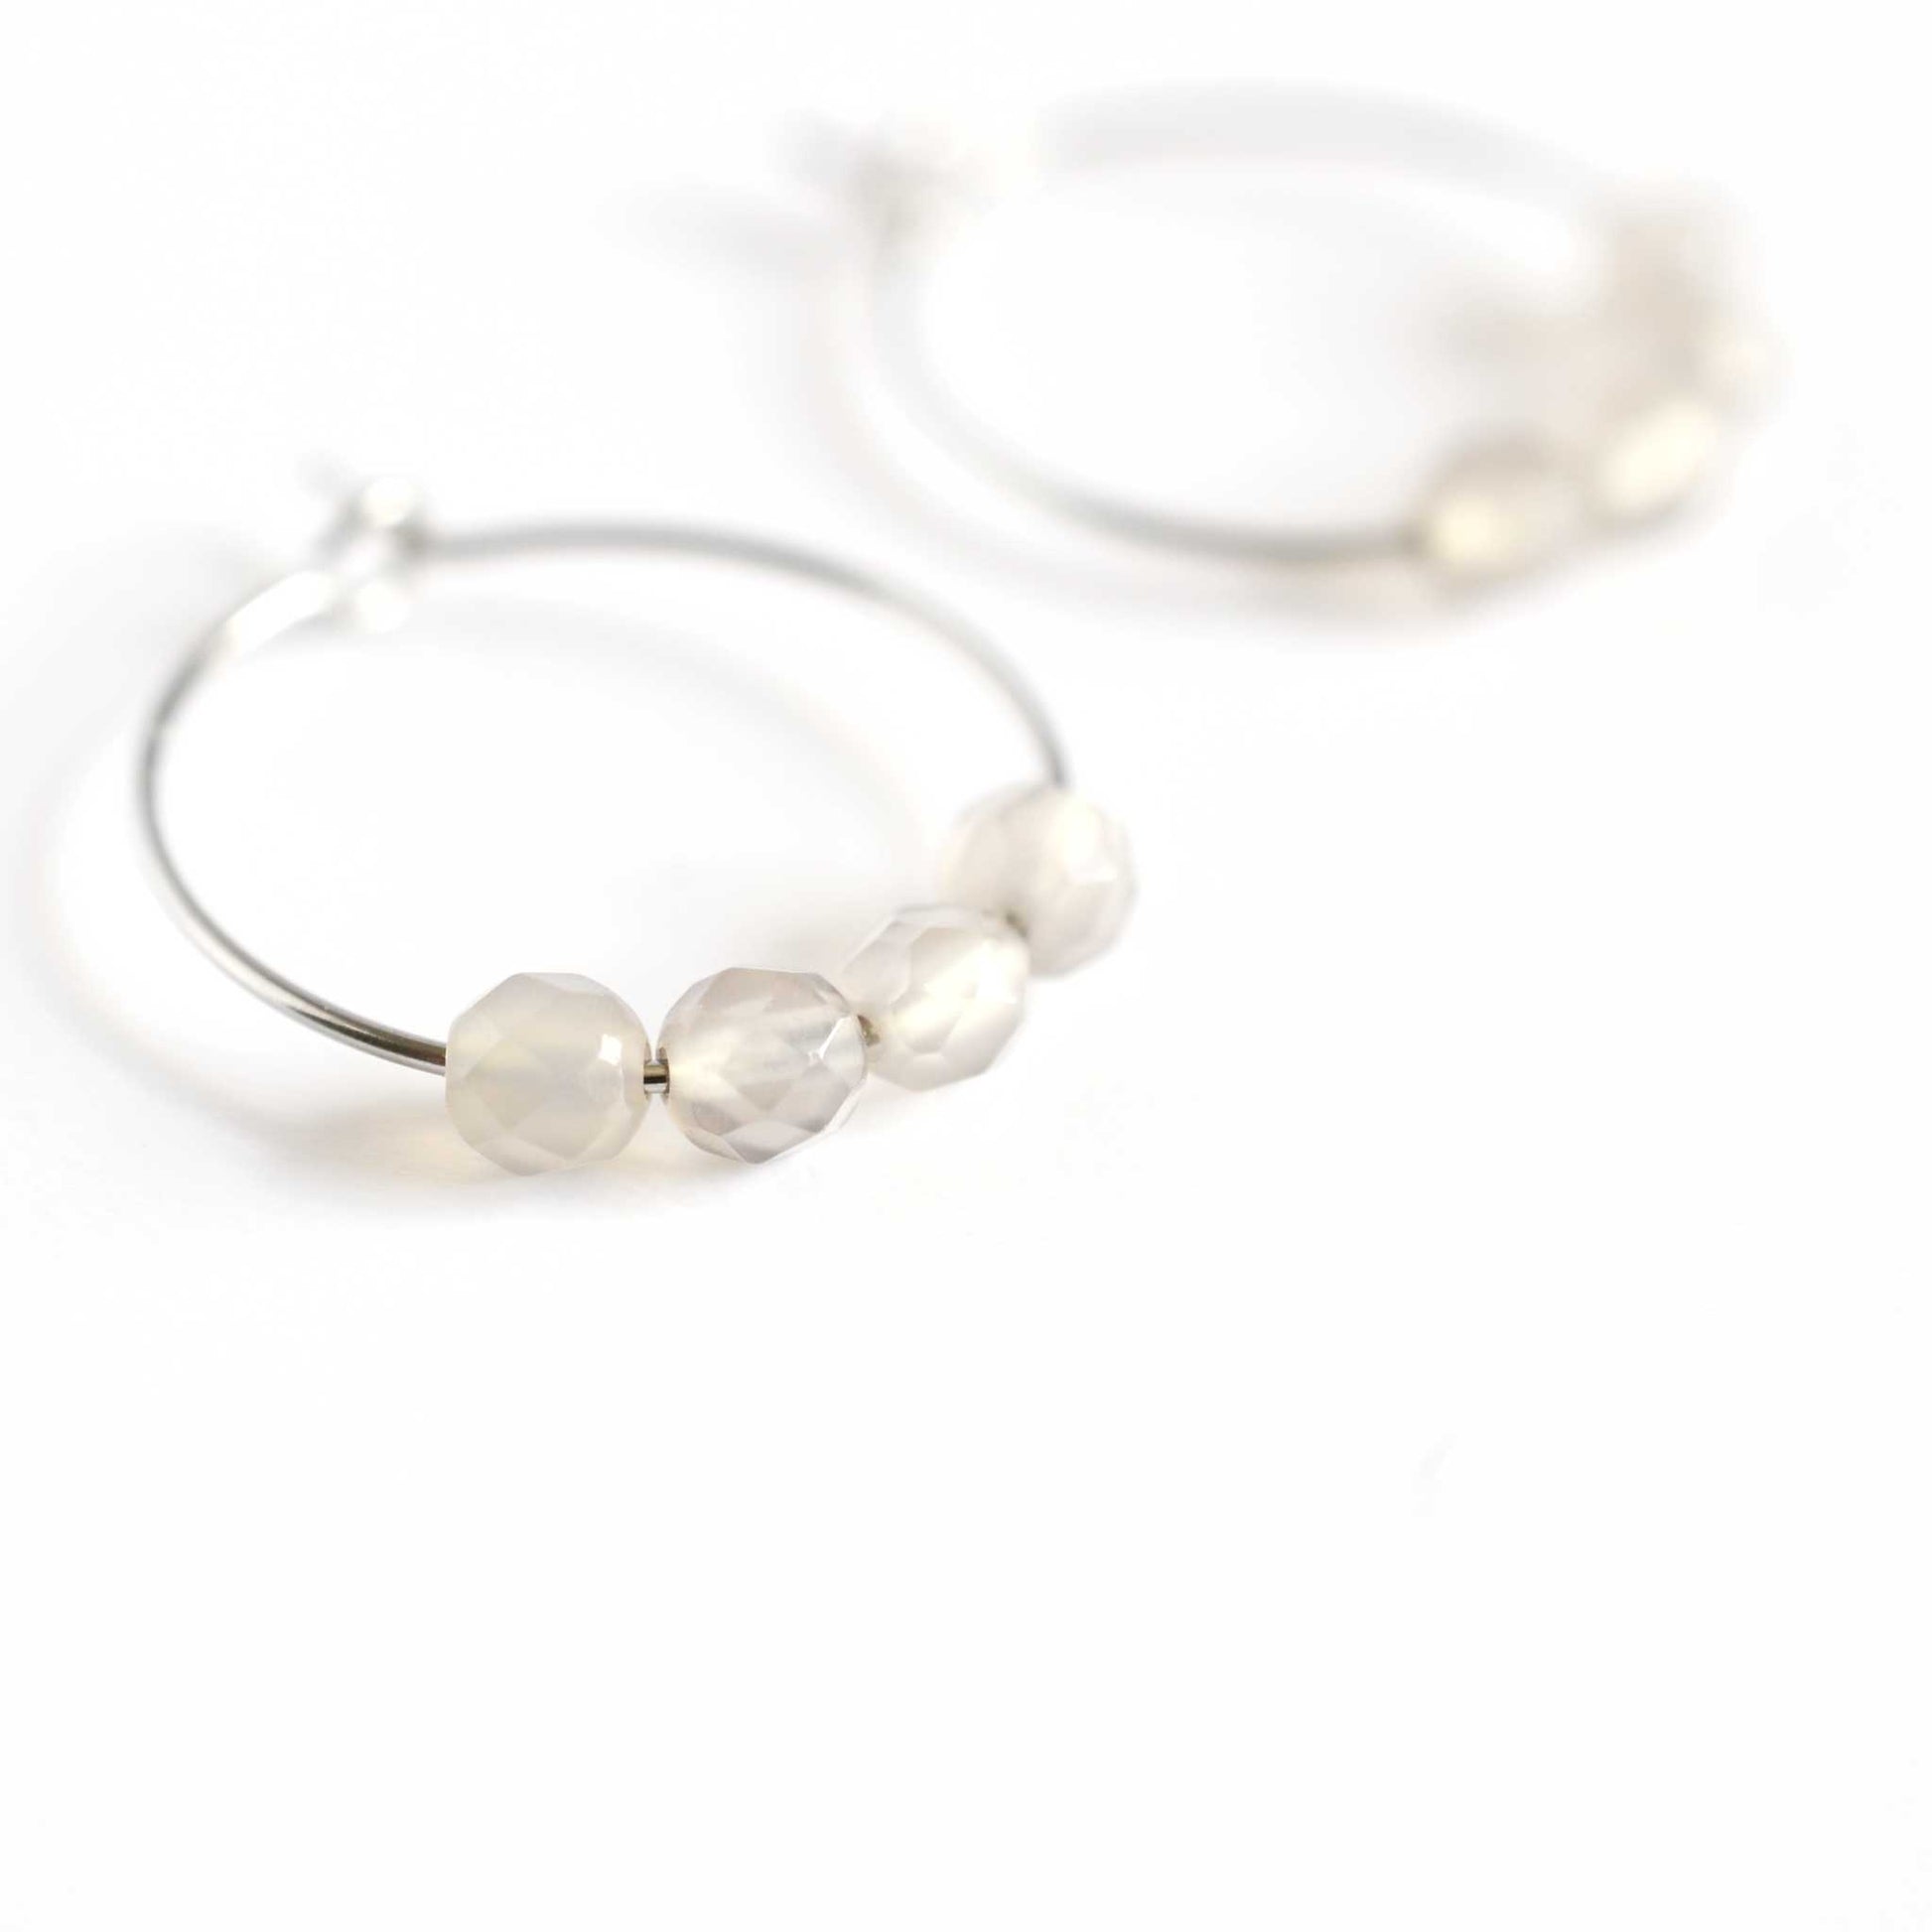 Close up of grey Agate hoop earrings with four small round faceted smoky grey Agate gemstone beads